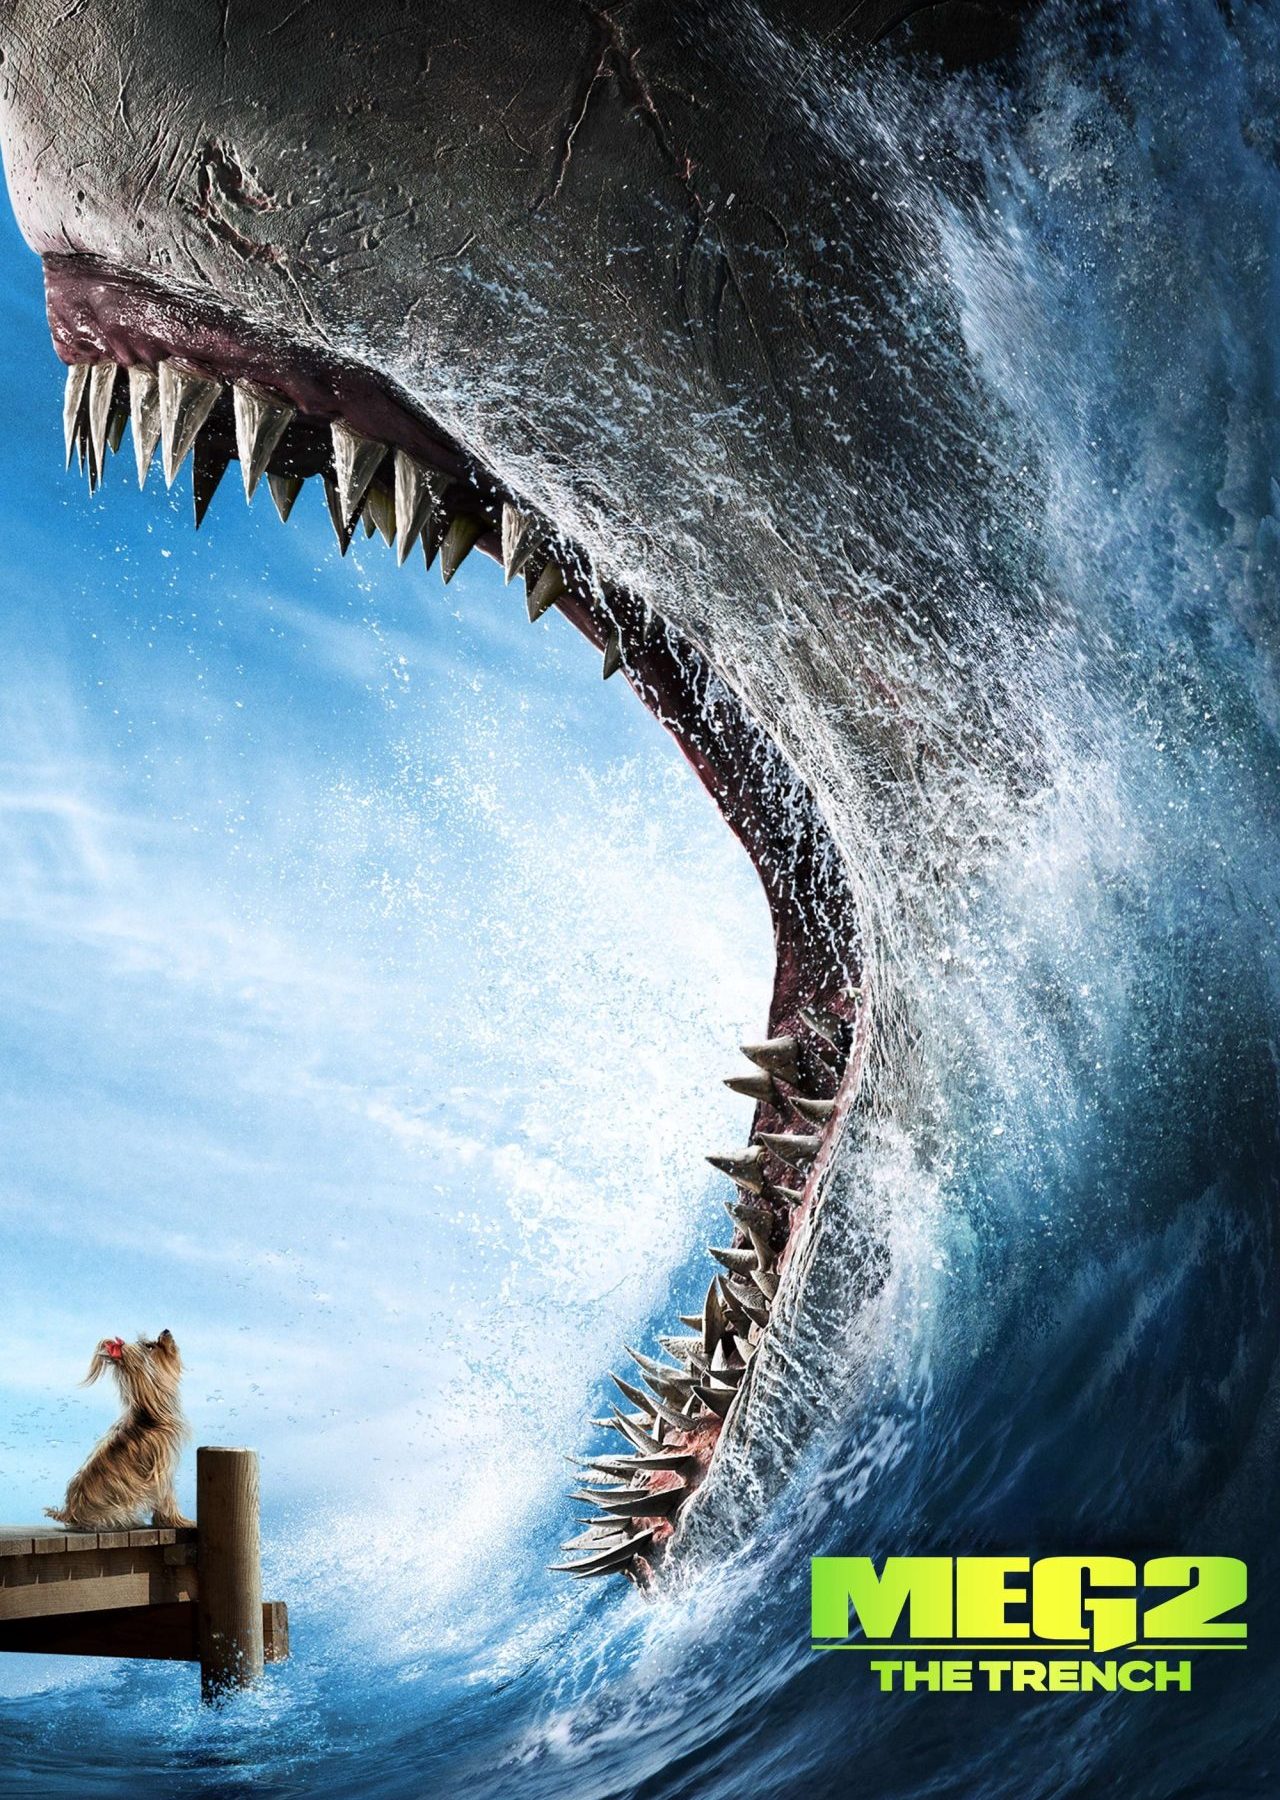 Poster for the movie "Meg 2: The Trench"